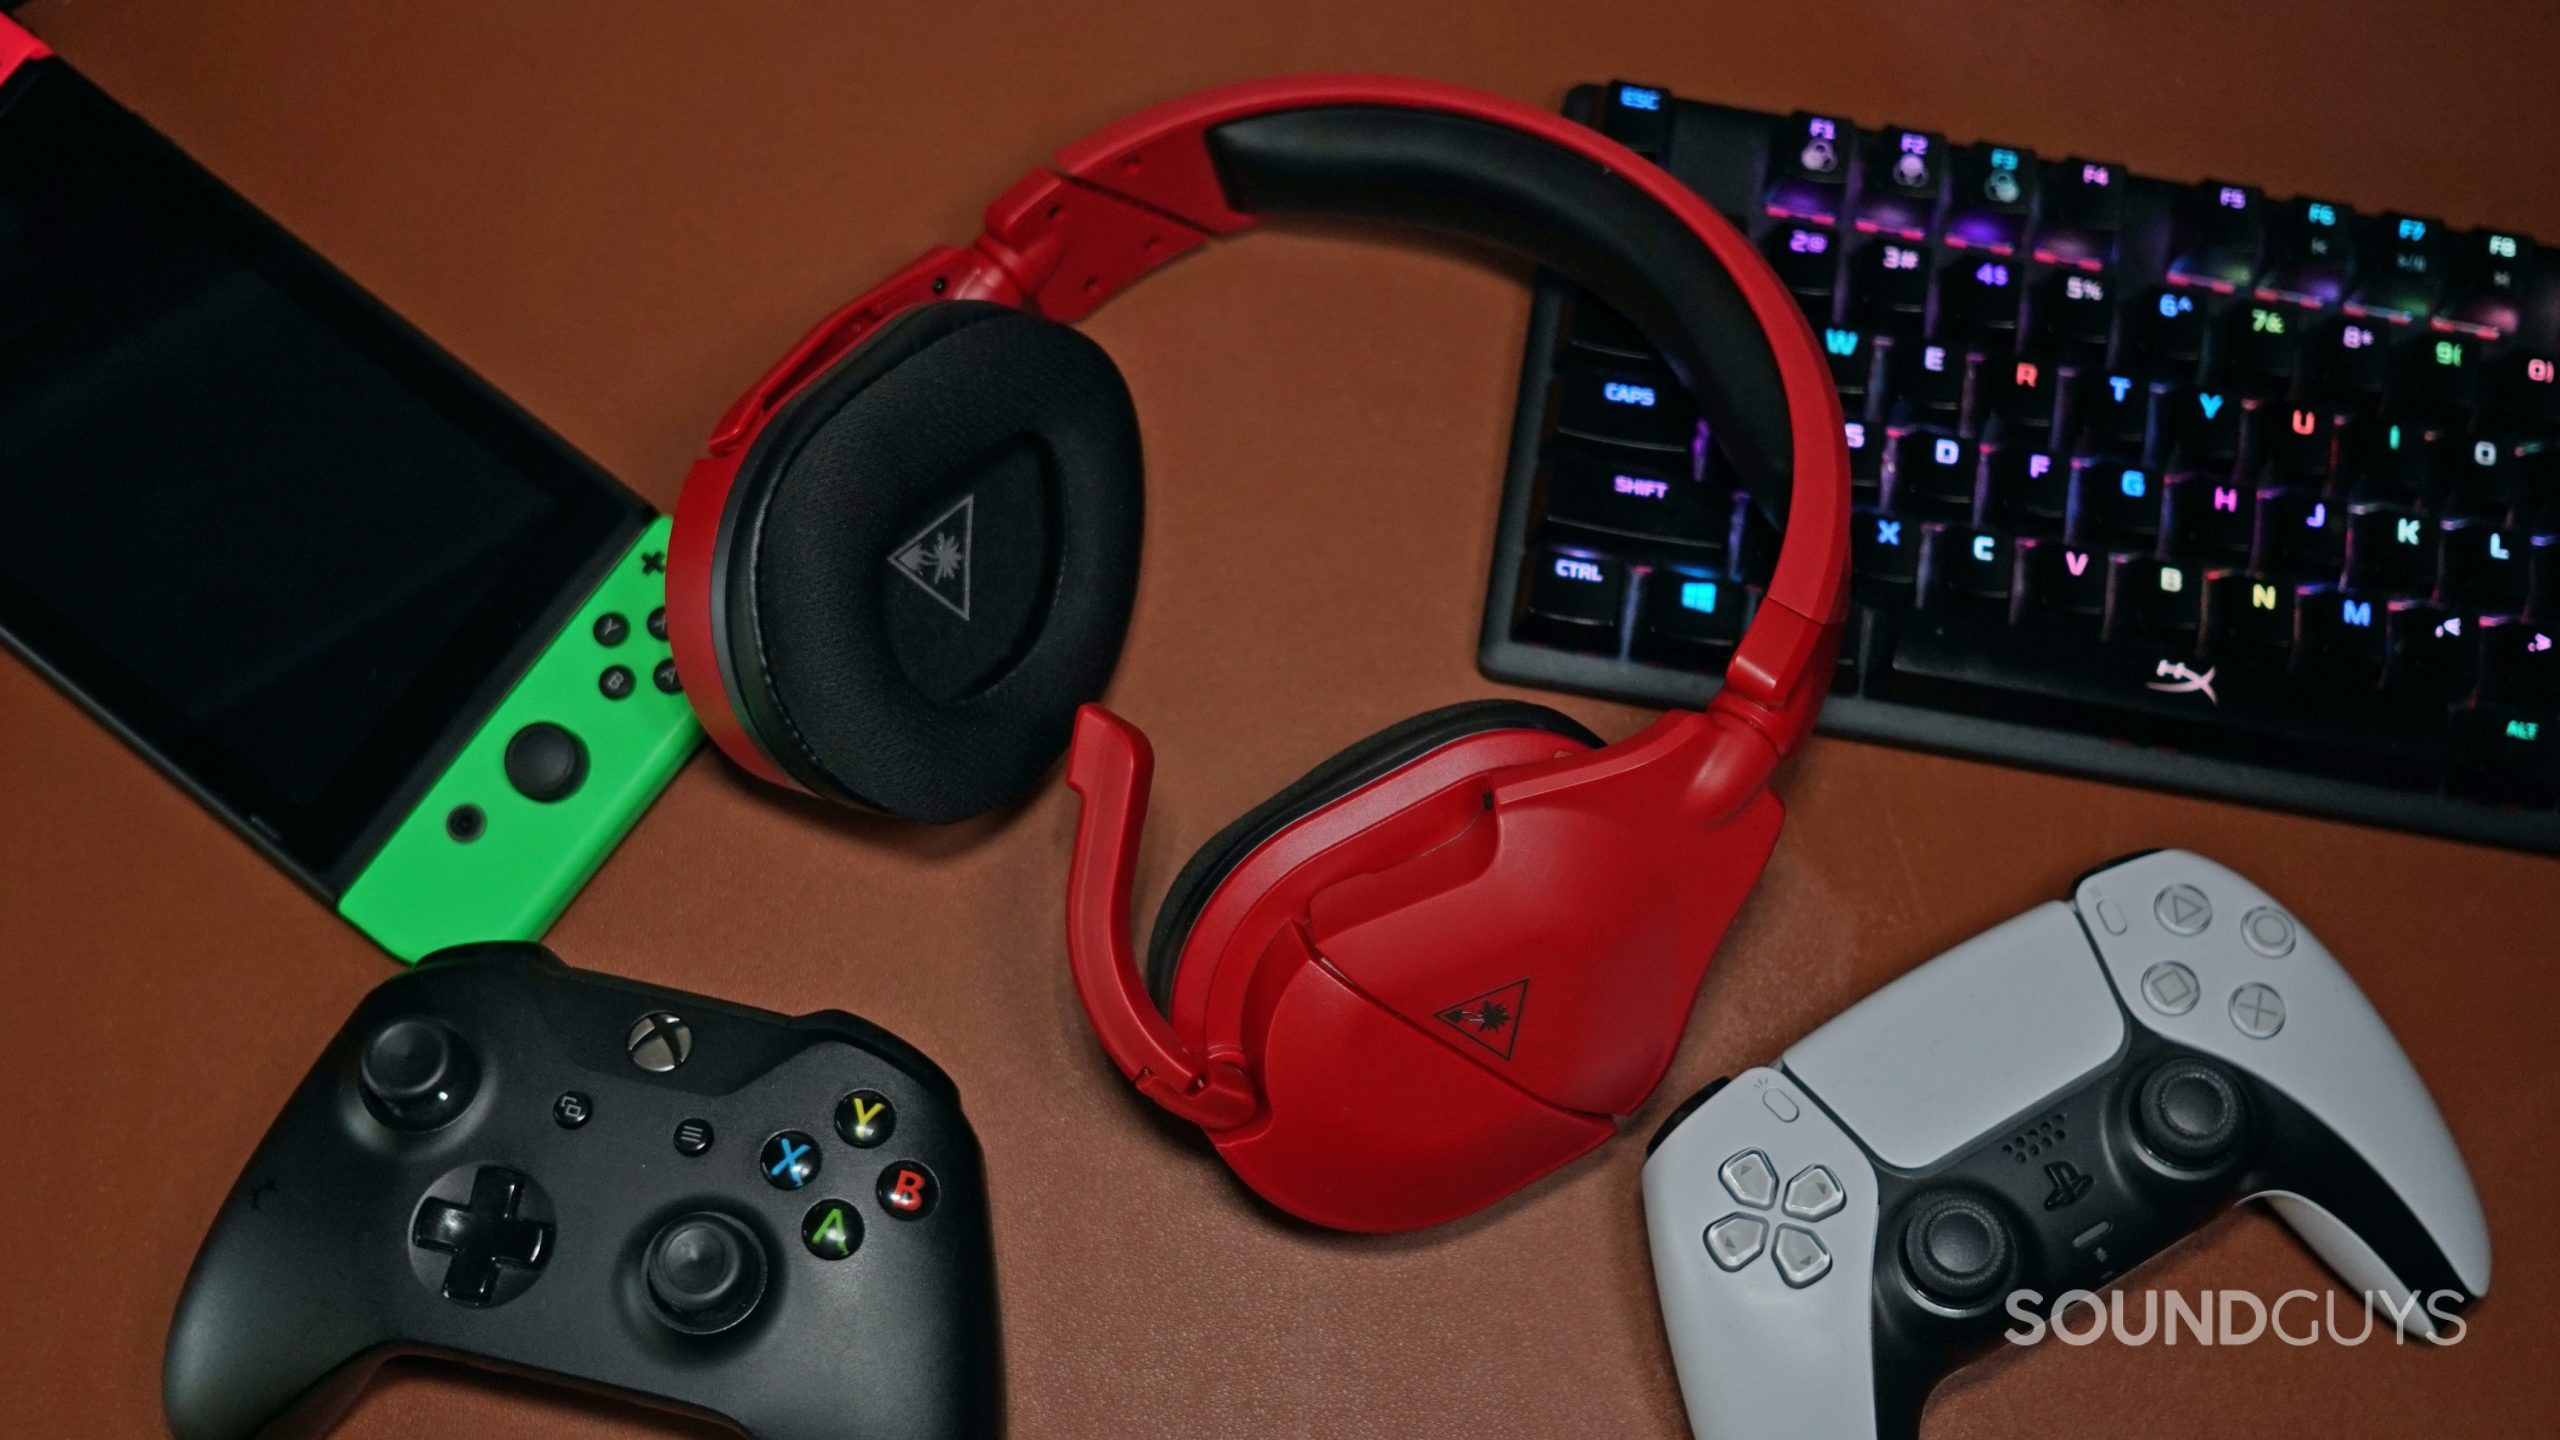 The Turtle Beach Stealth 600 Gen 2 MAX lays on a leather surface surrounded by a PlayStation DualShock controller, an Xbox One controller, a Nintendo Switch, and a HyperX mechanical gaming keyboard.